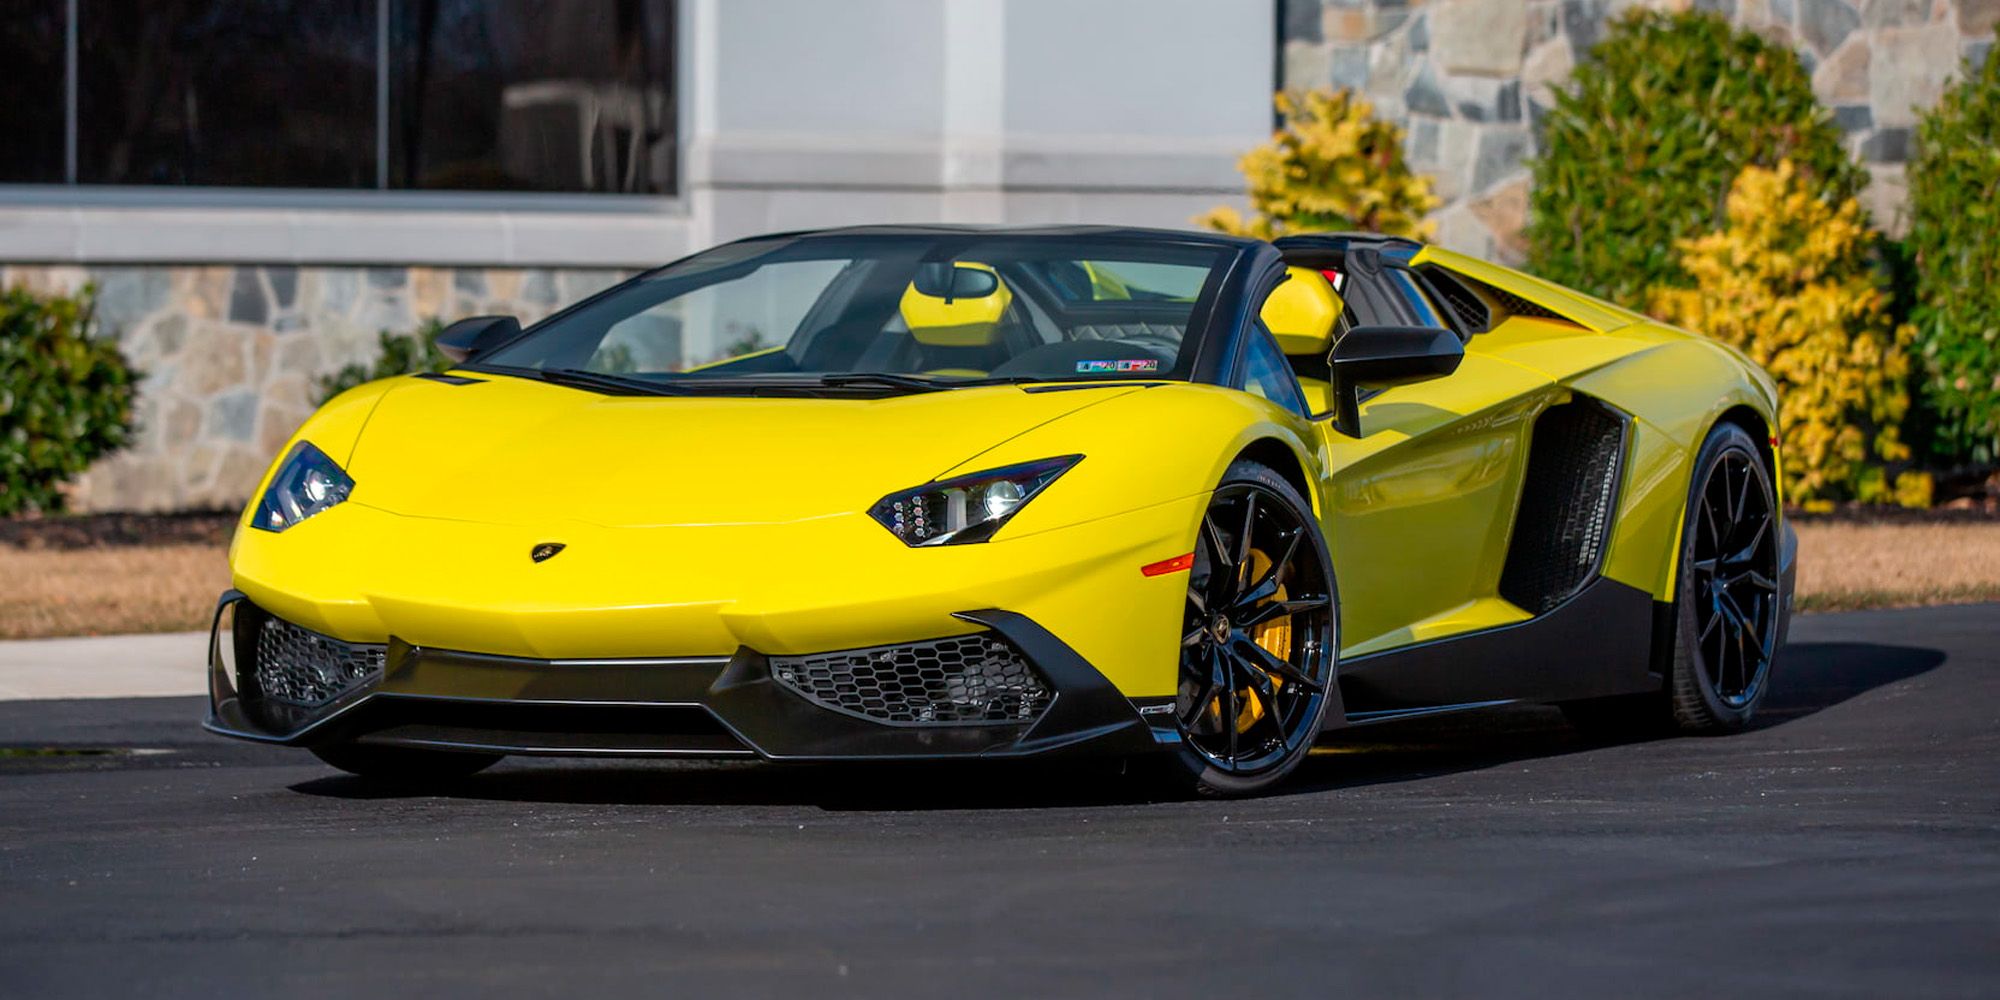 The front of the Aventador LP720 - front